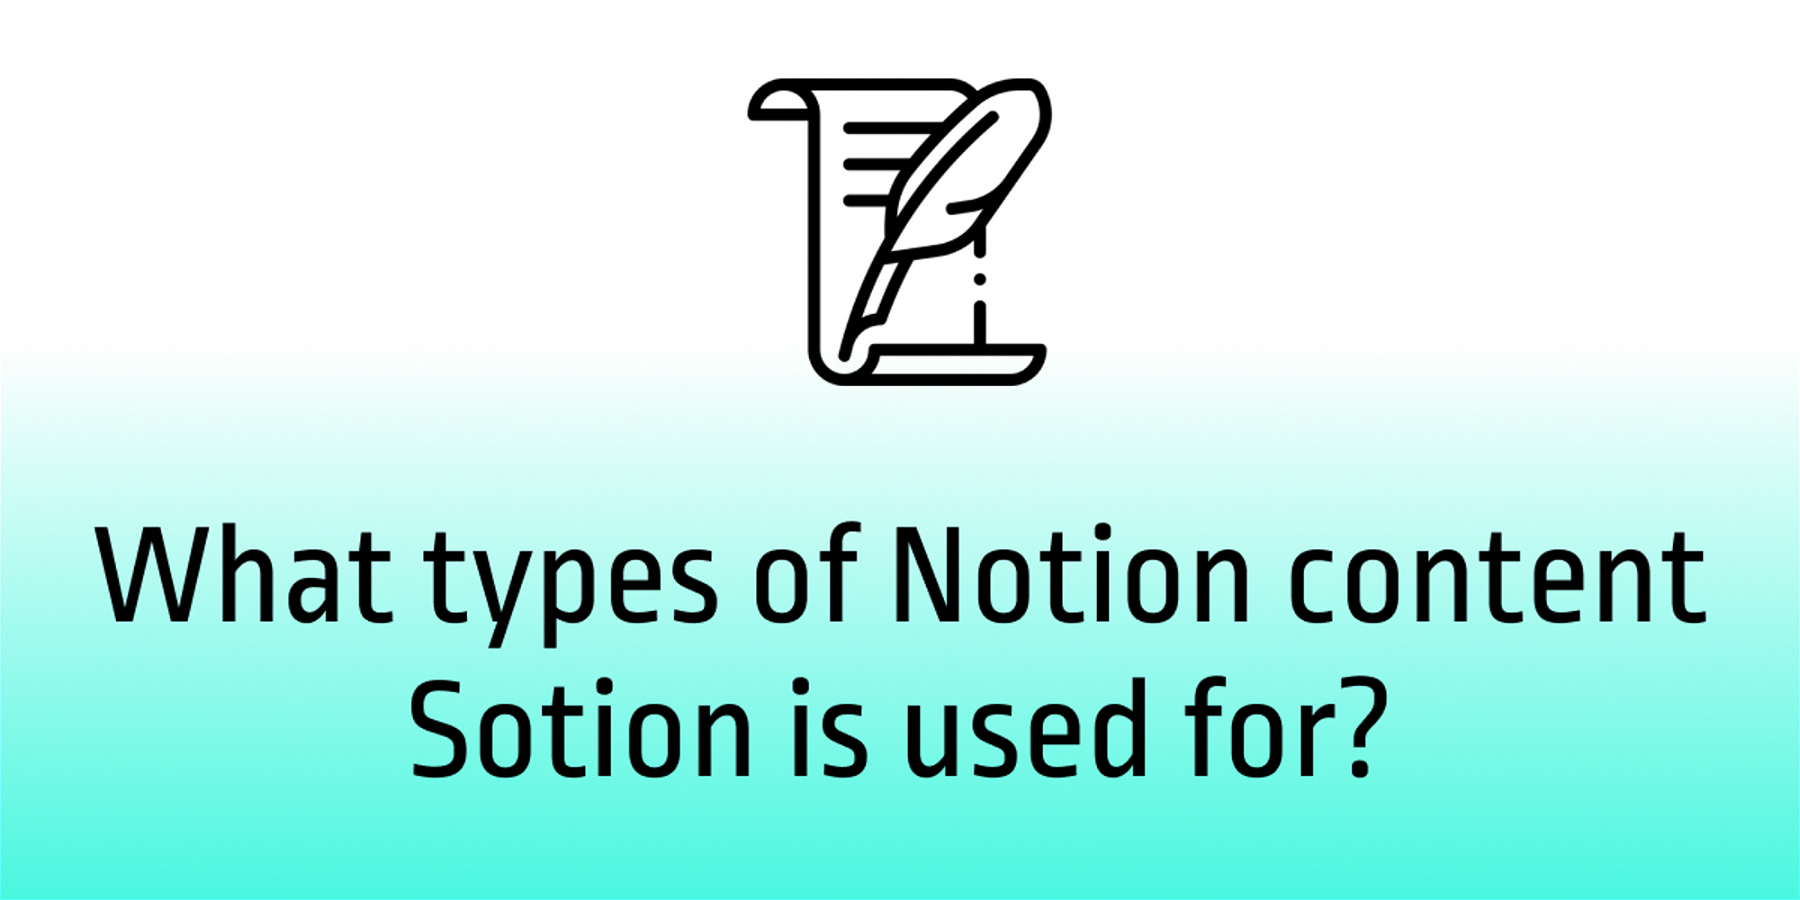 What are the types of Notion content Sotion is used for?